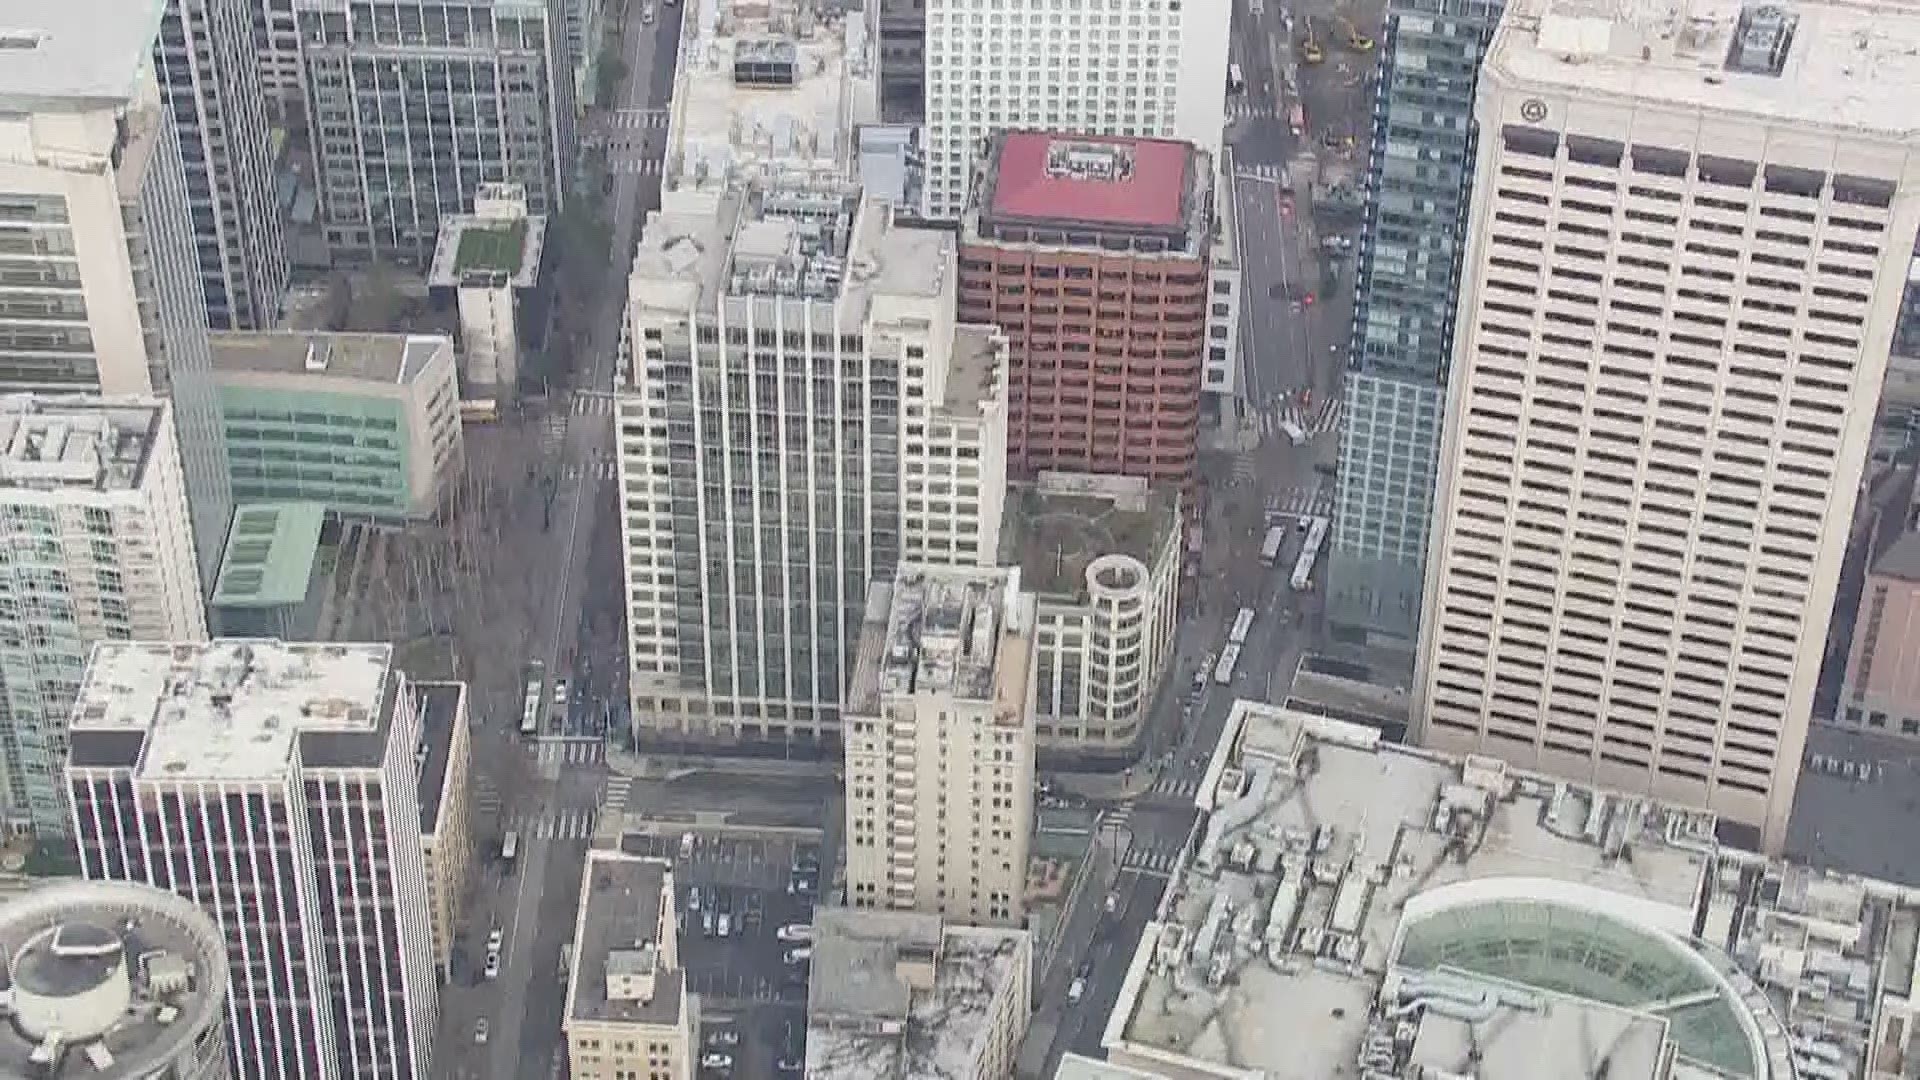 Nordstrom to vacate downtown Seattle office tower on Seventh Avenue